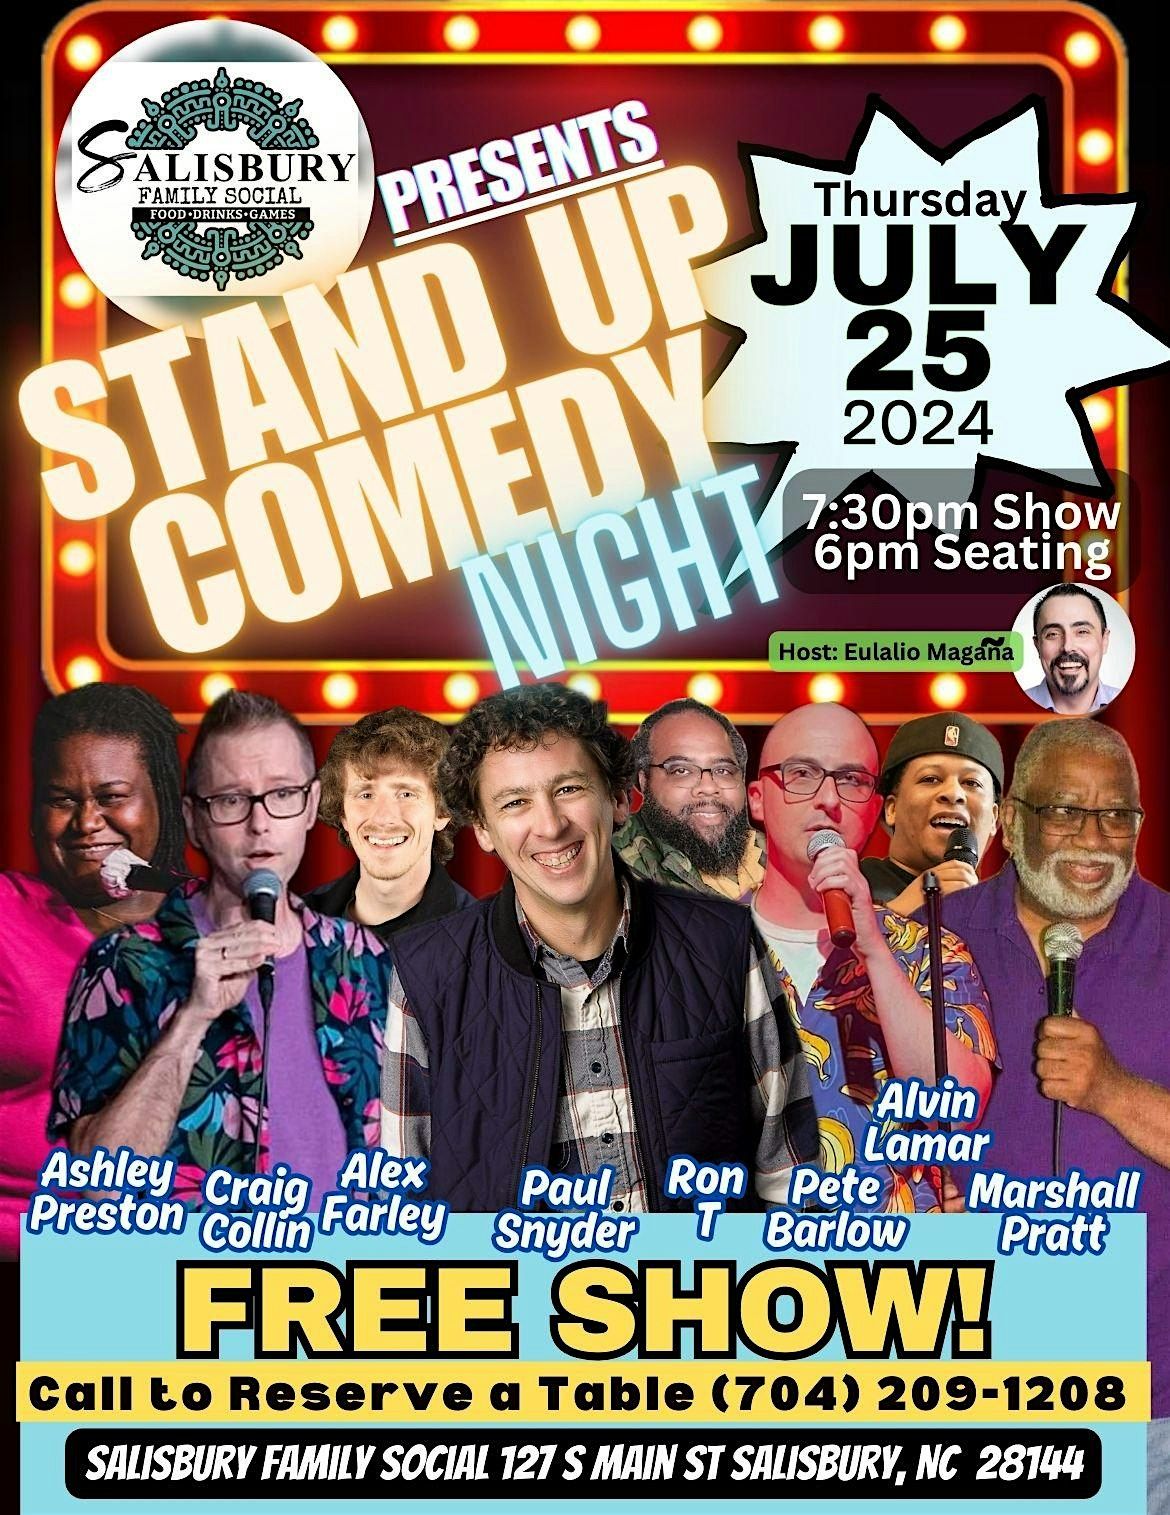 Free Stand Up Comedy Show at Salisbury Family Social (June 13, 2024)